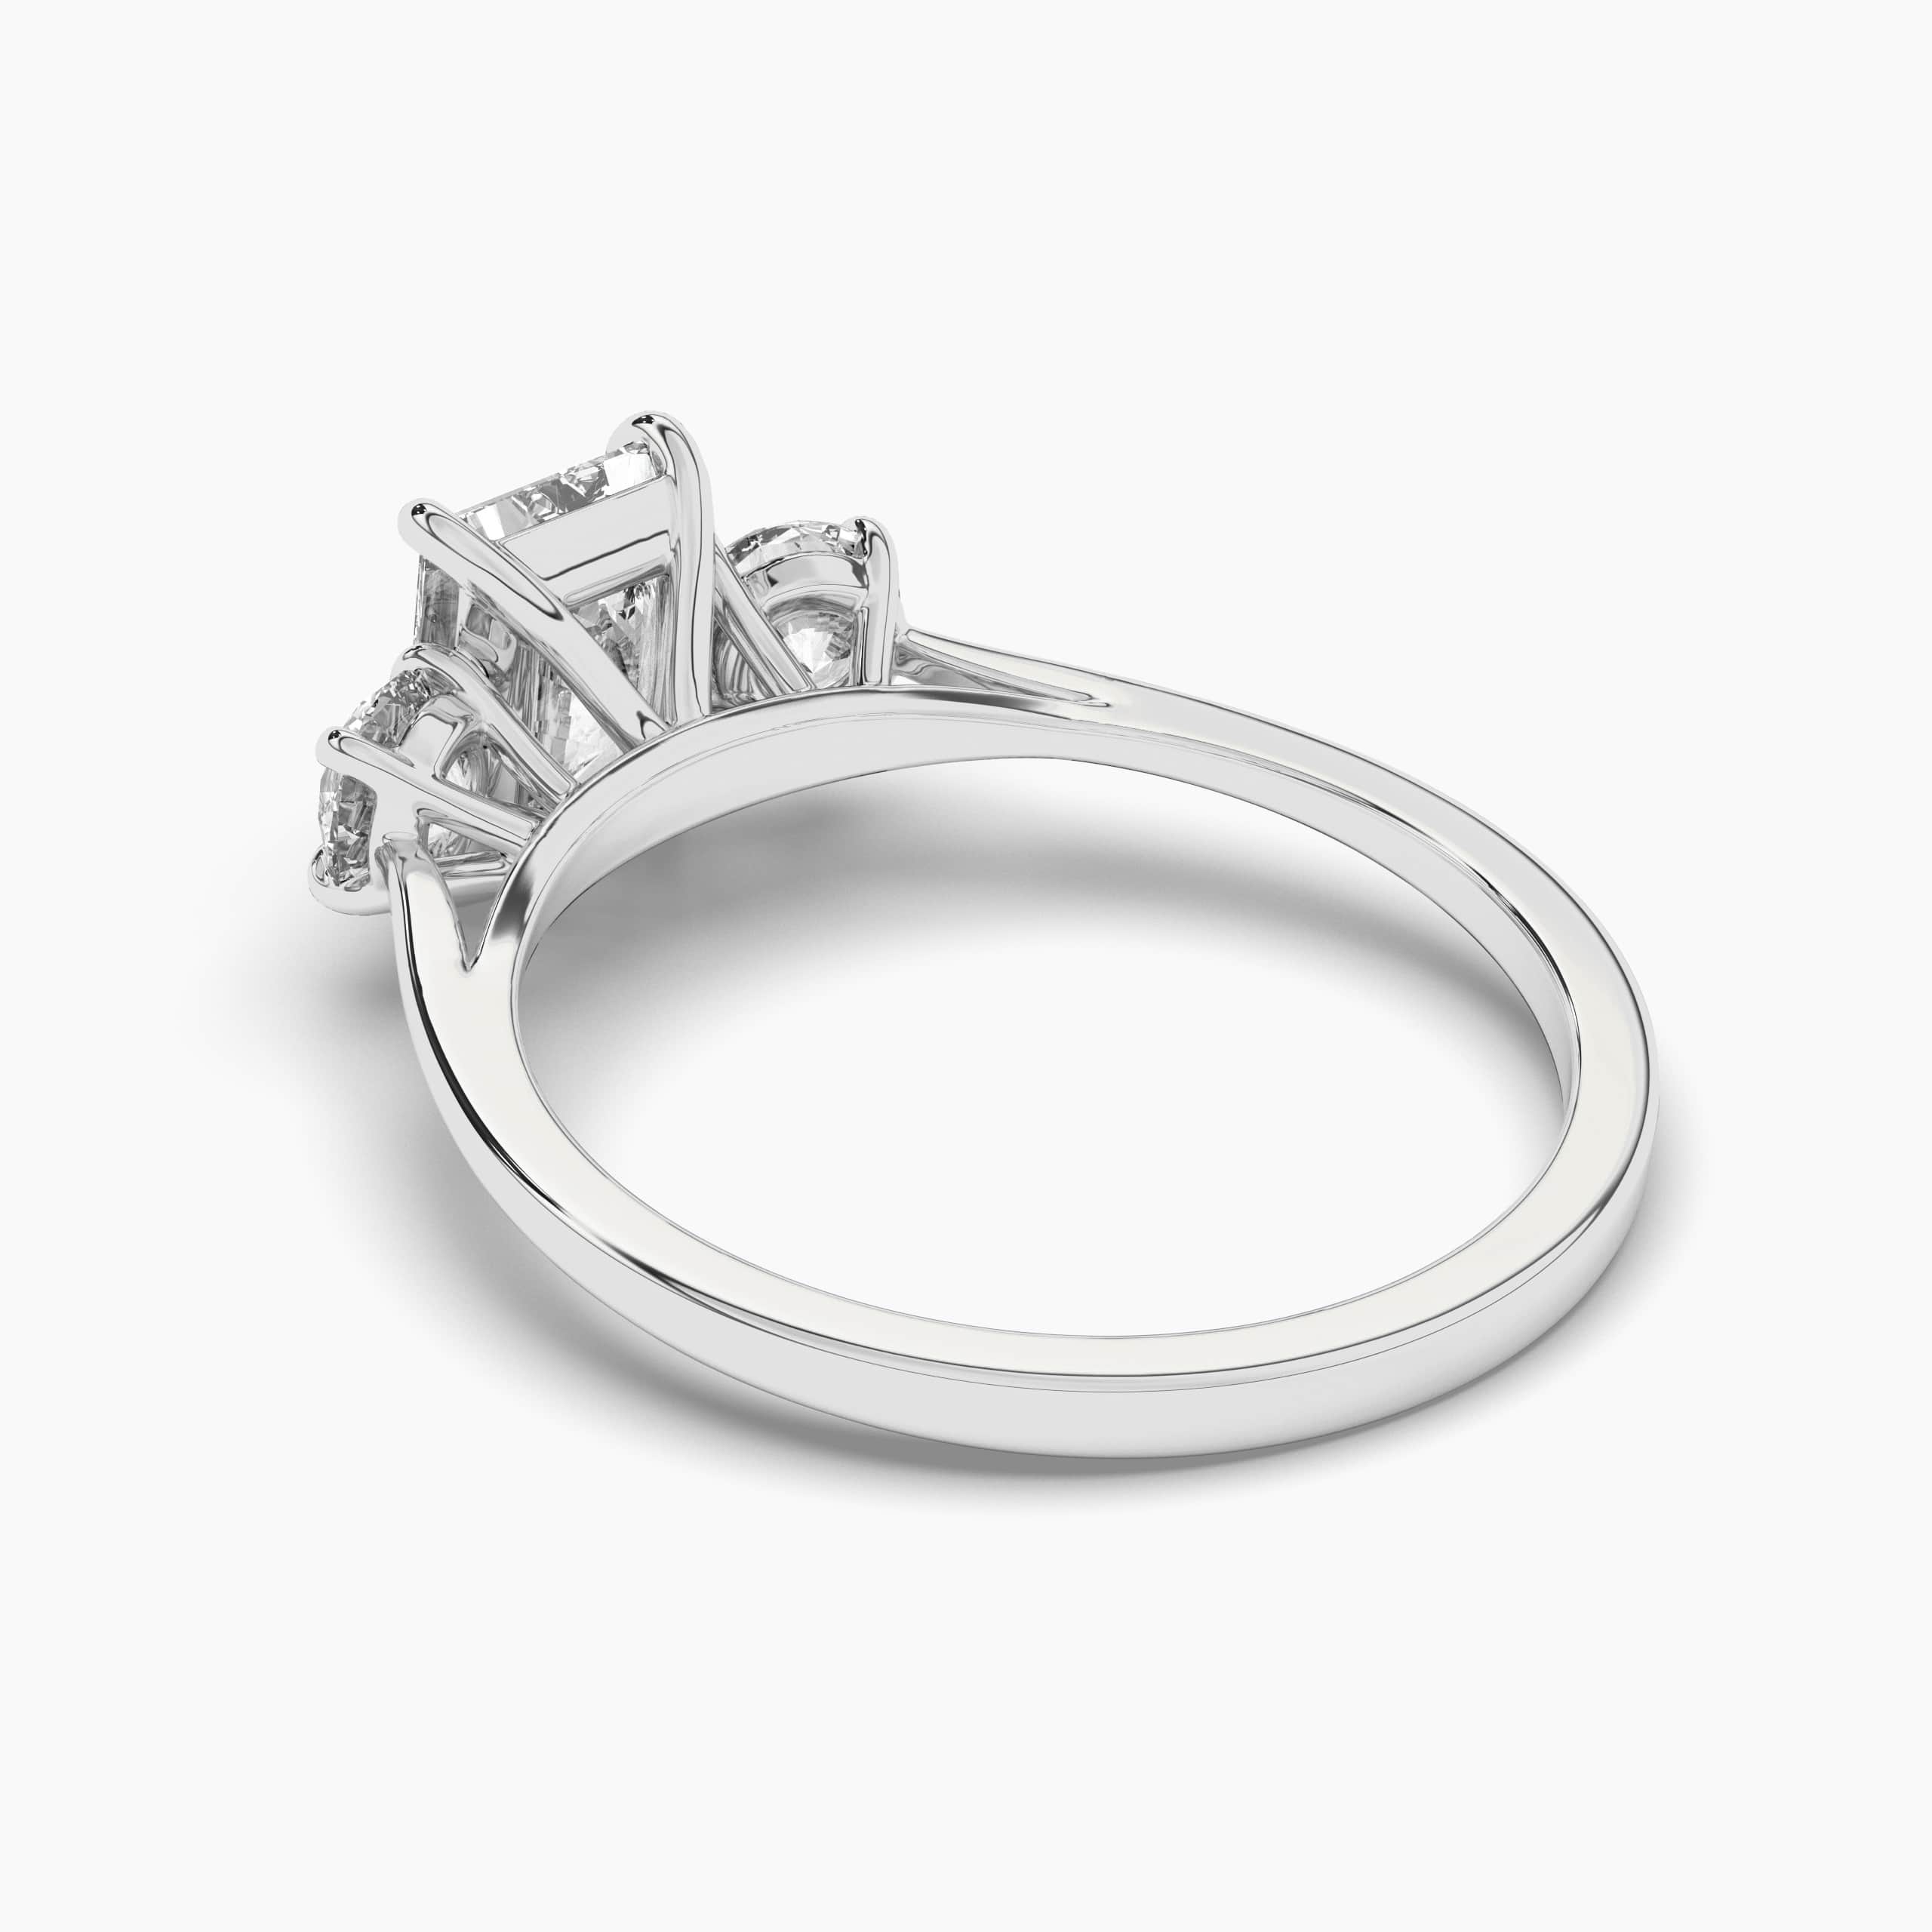 White Gold Three-Stone Radiant Cut Center with Emerald Cut Side Stones